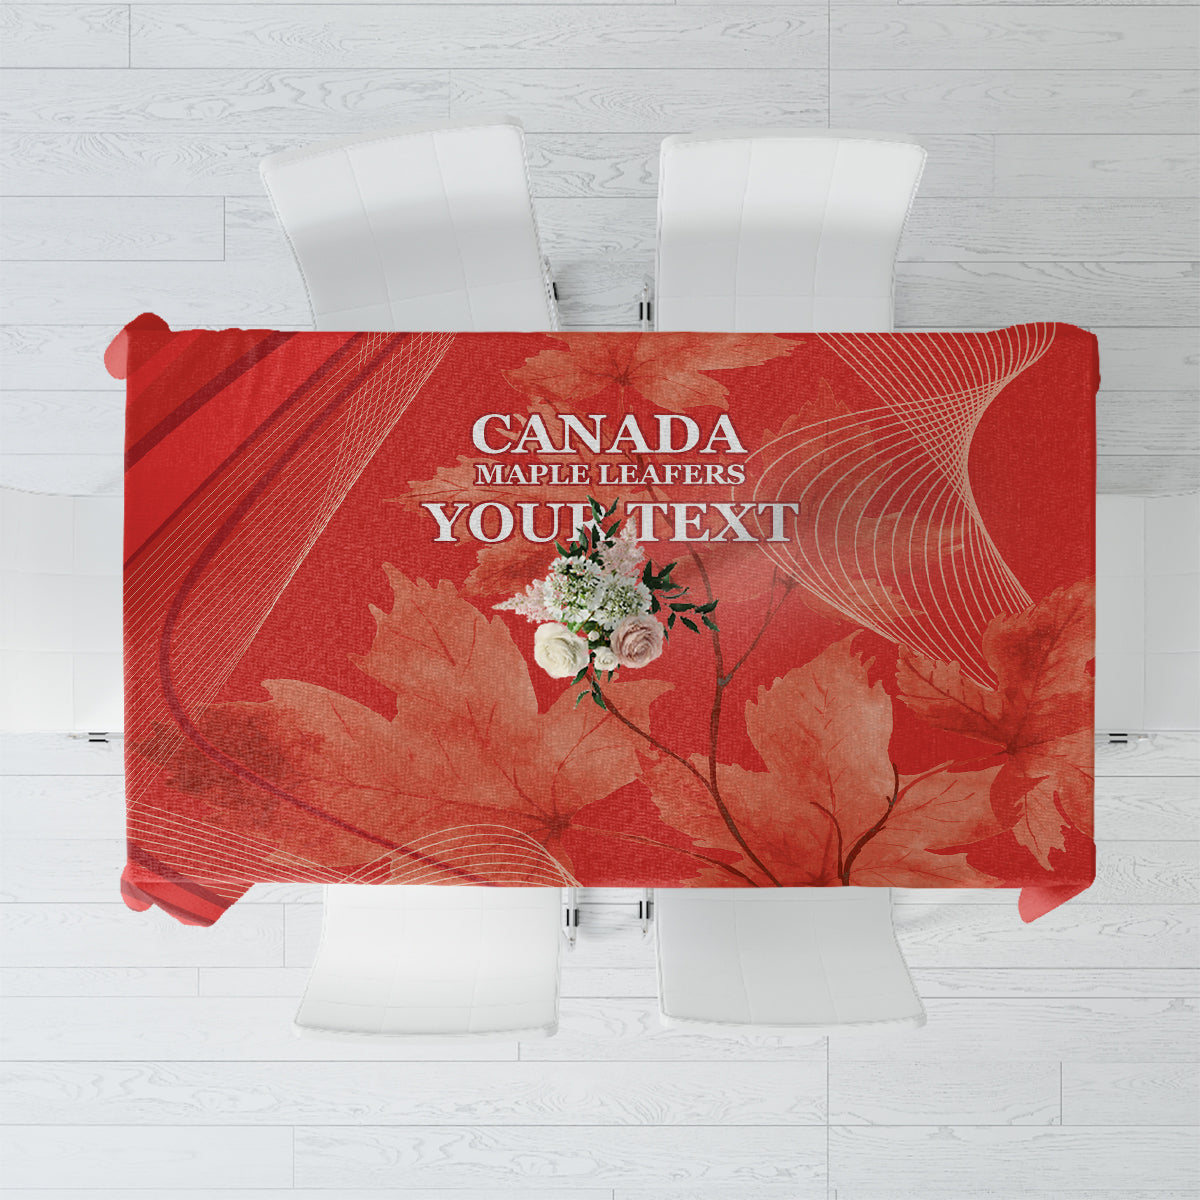 Canada Cricket World Cup 2024 Tablecloth Maple Leafers Make Champions